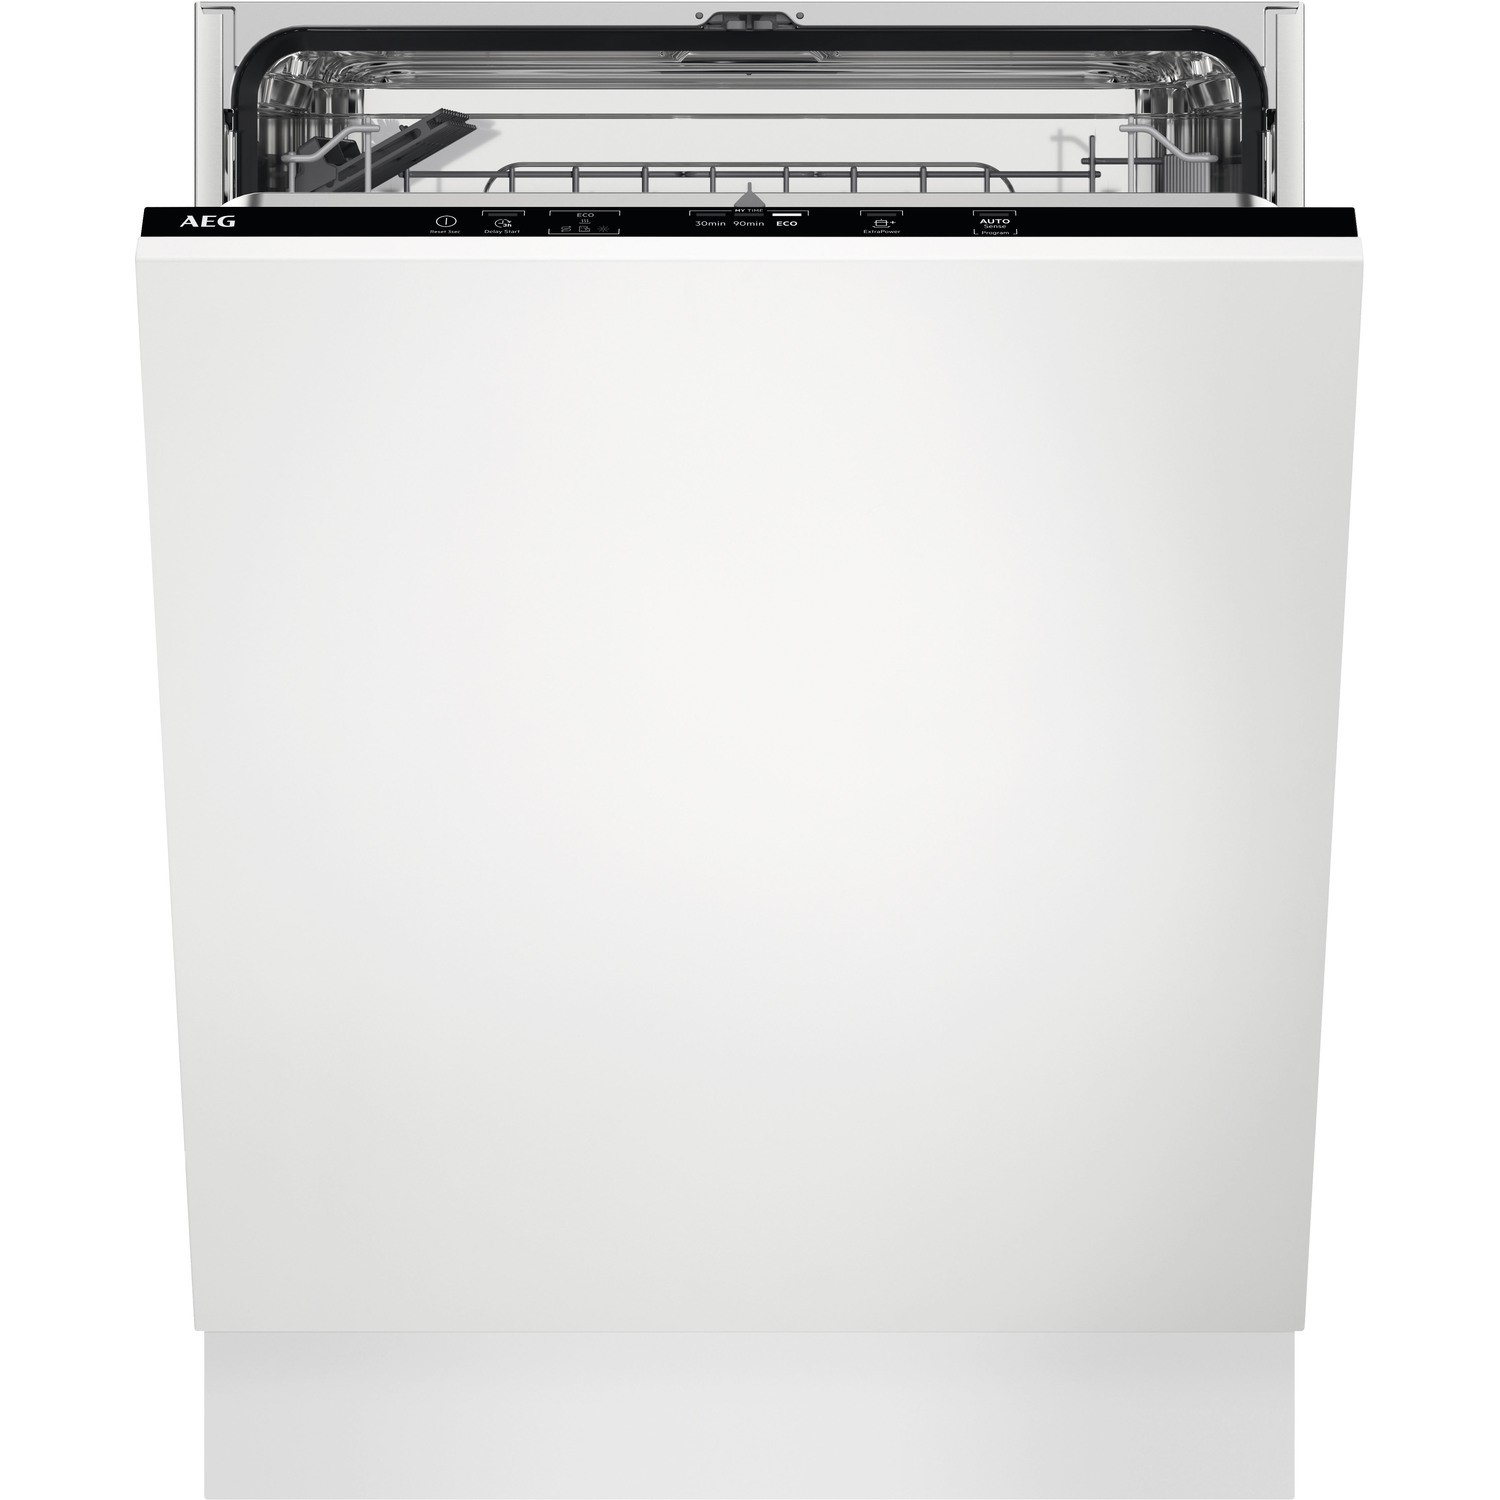 AEG 13 Place Settings Fully Integrated Dishwasher FSB42607Z | Appliances Direct